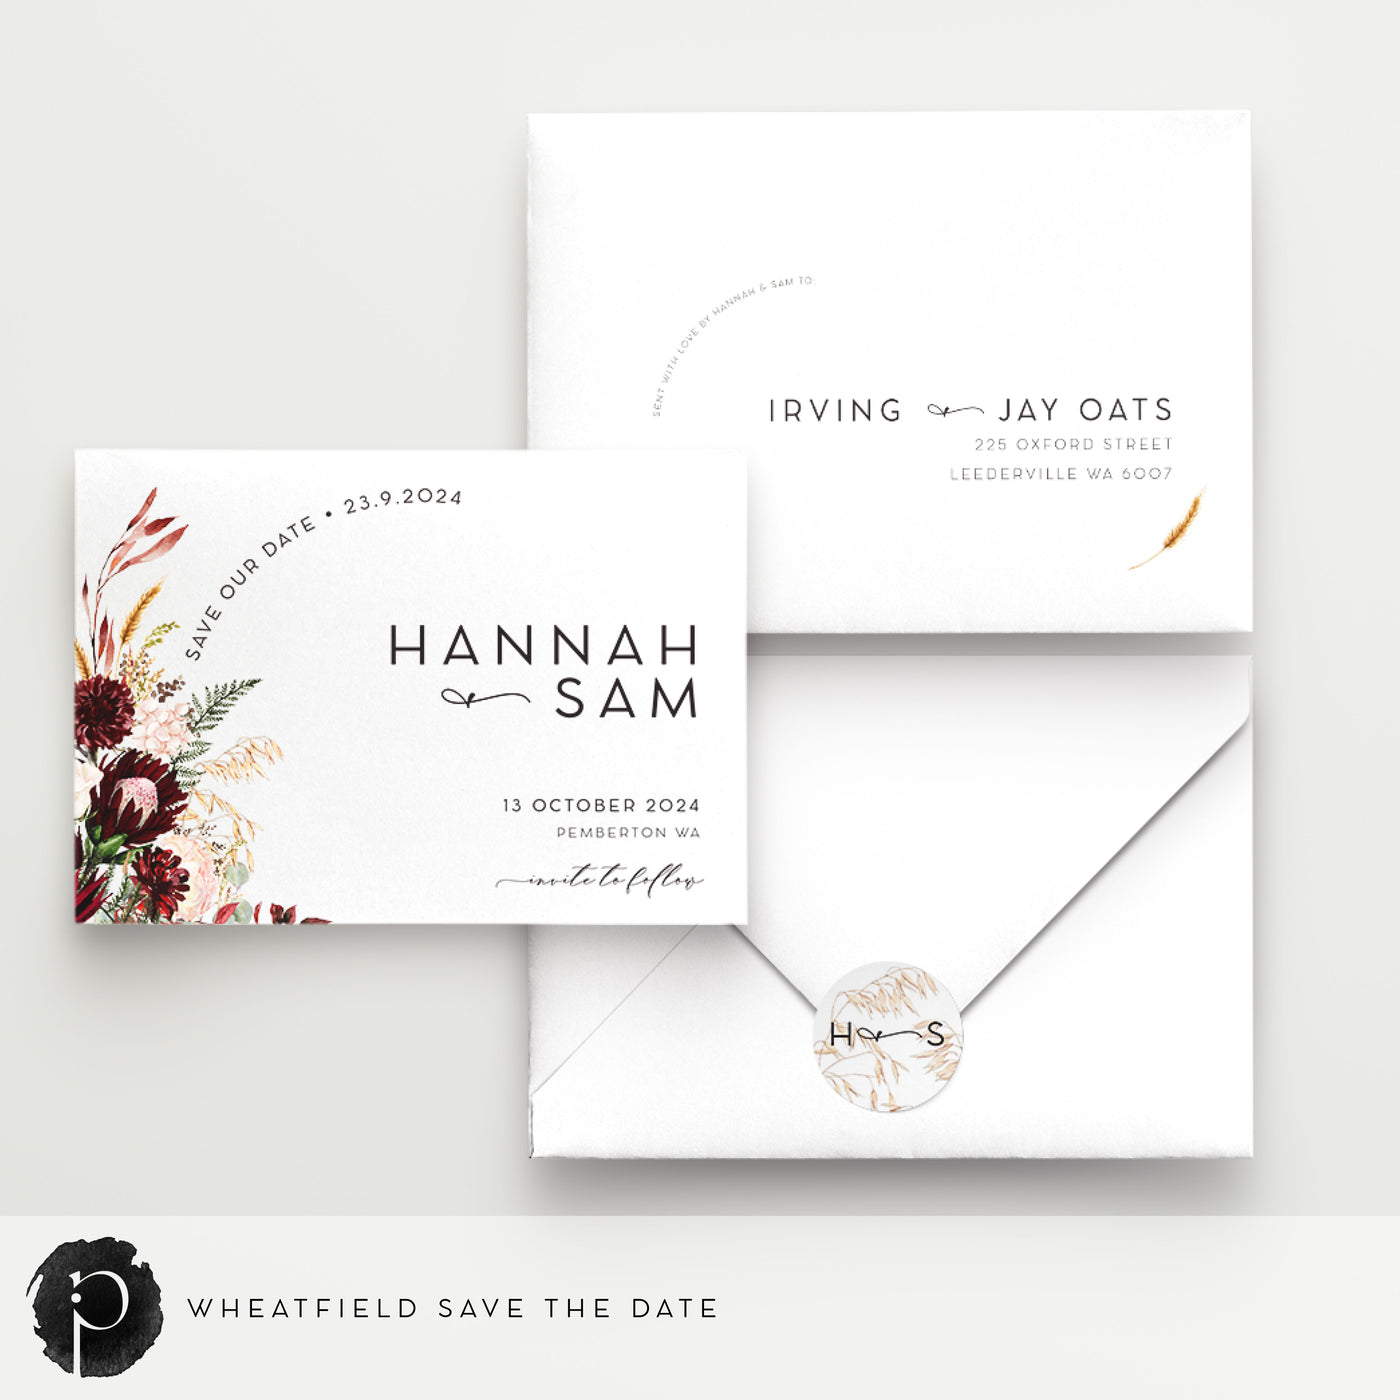 Wheatfield - Save The Date Cards